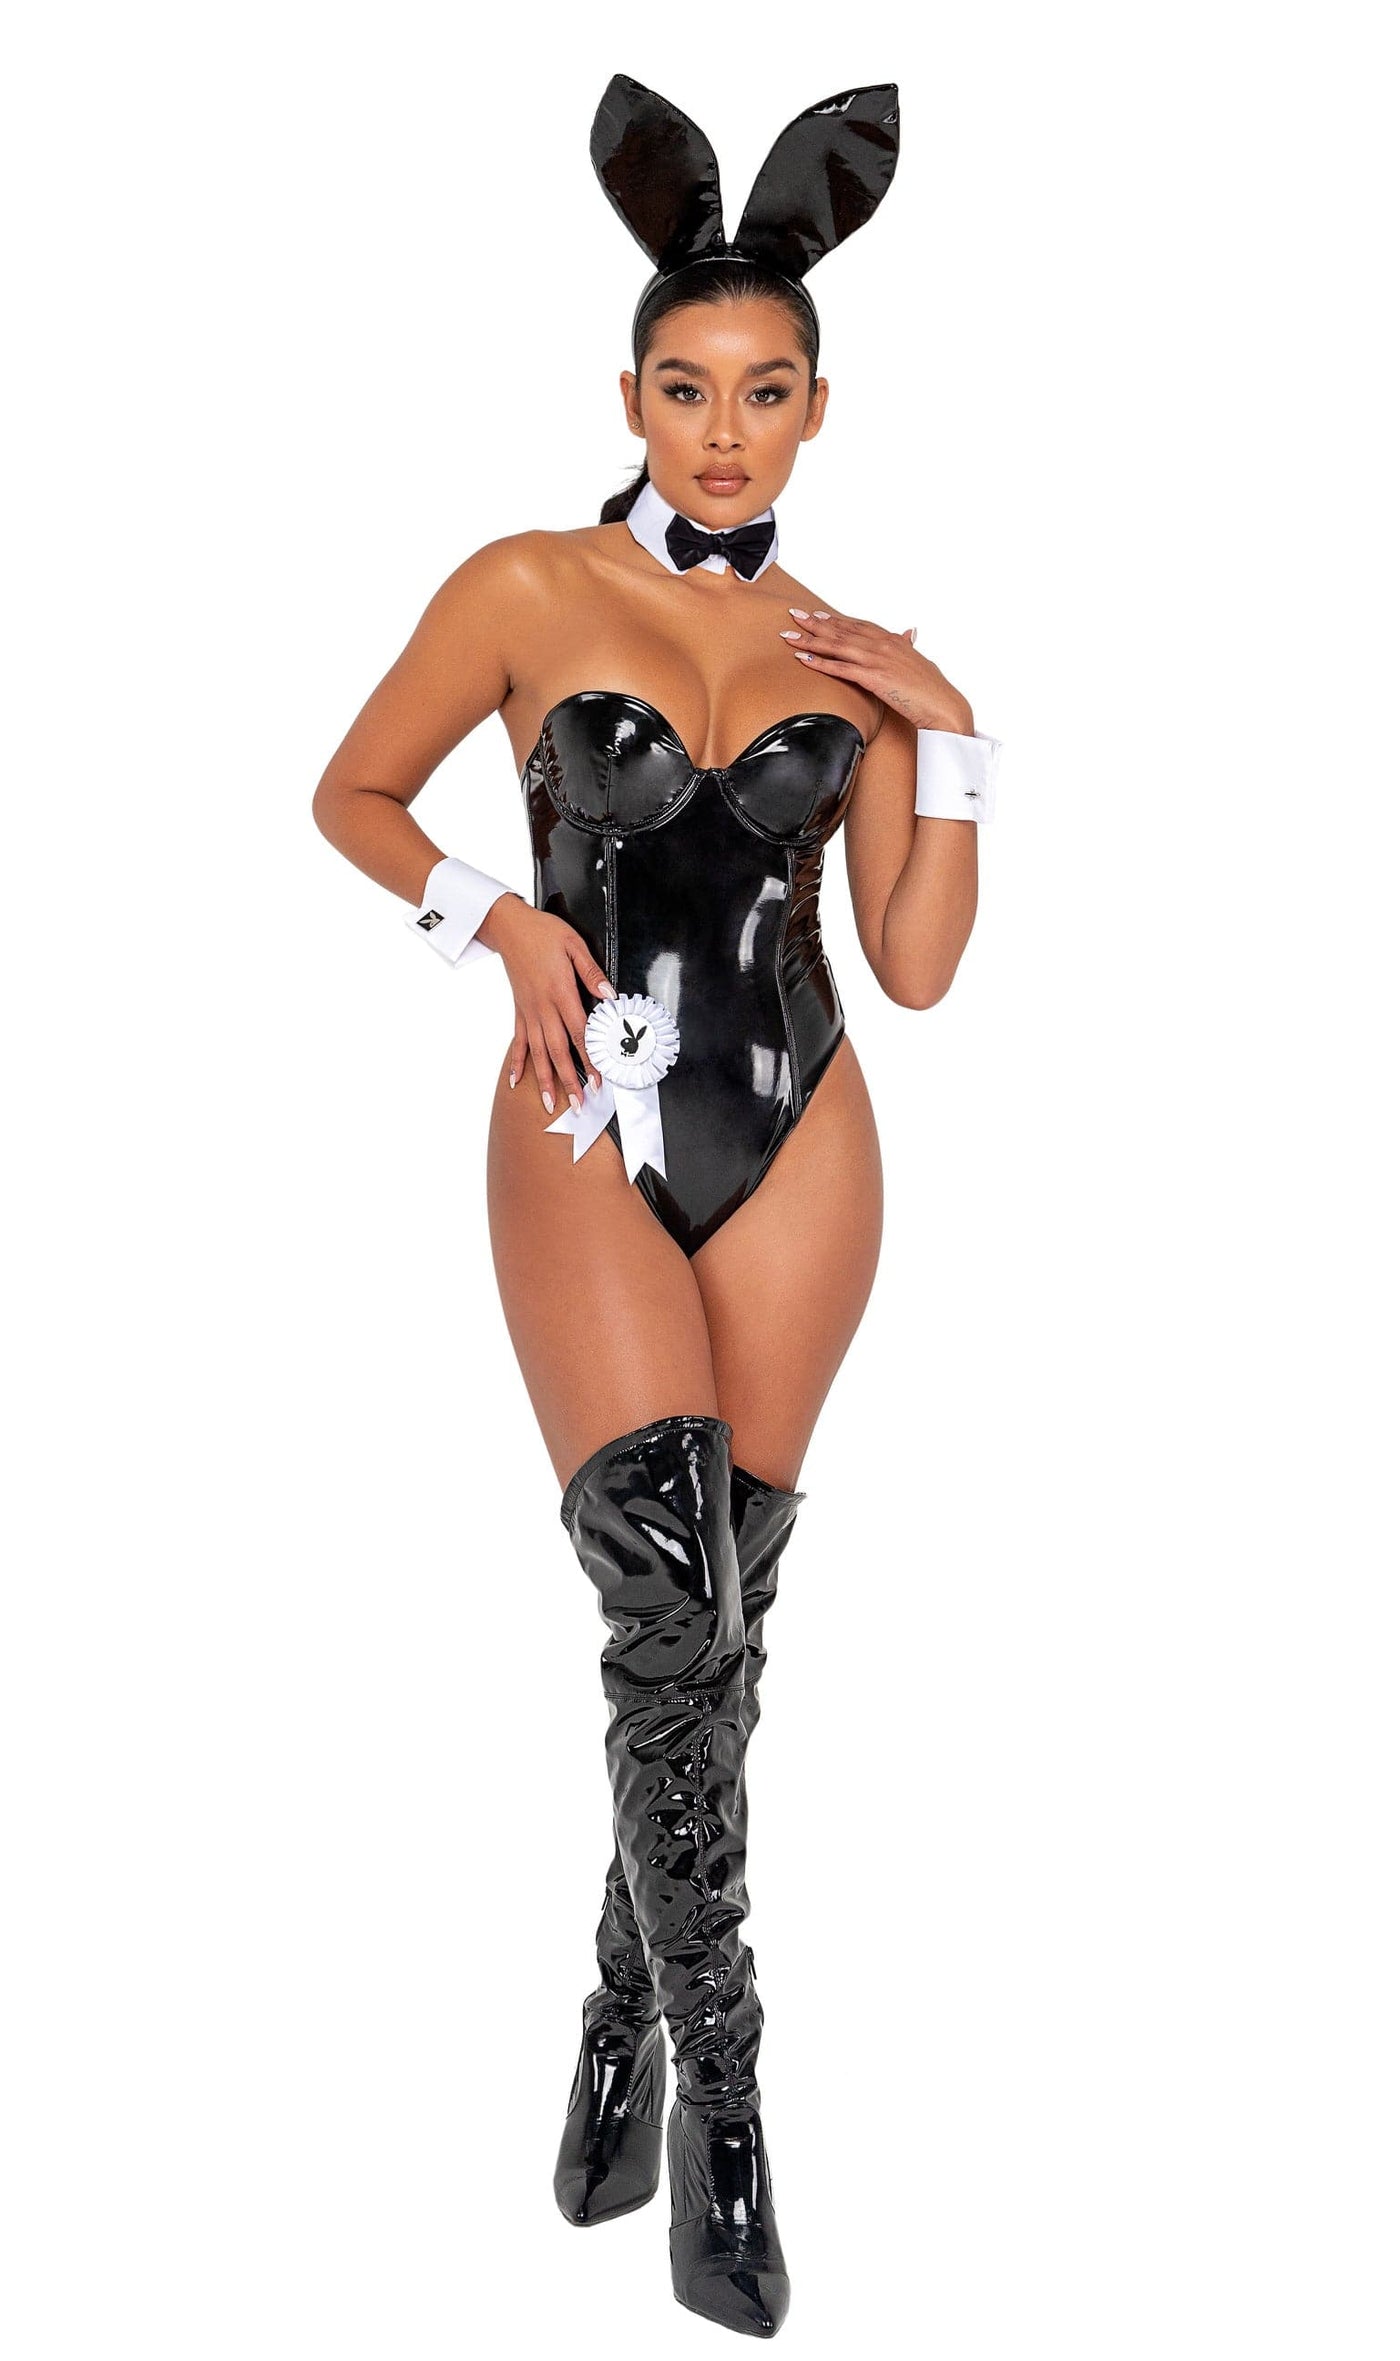 8pc. Official Playboy Bunny Seductress Vinyl Naughty Bunny Women's Costume - For Love of Lingerie